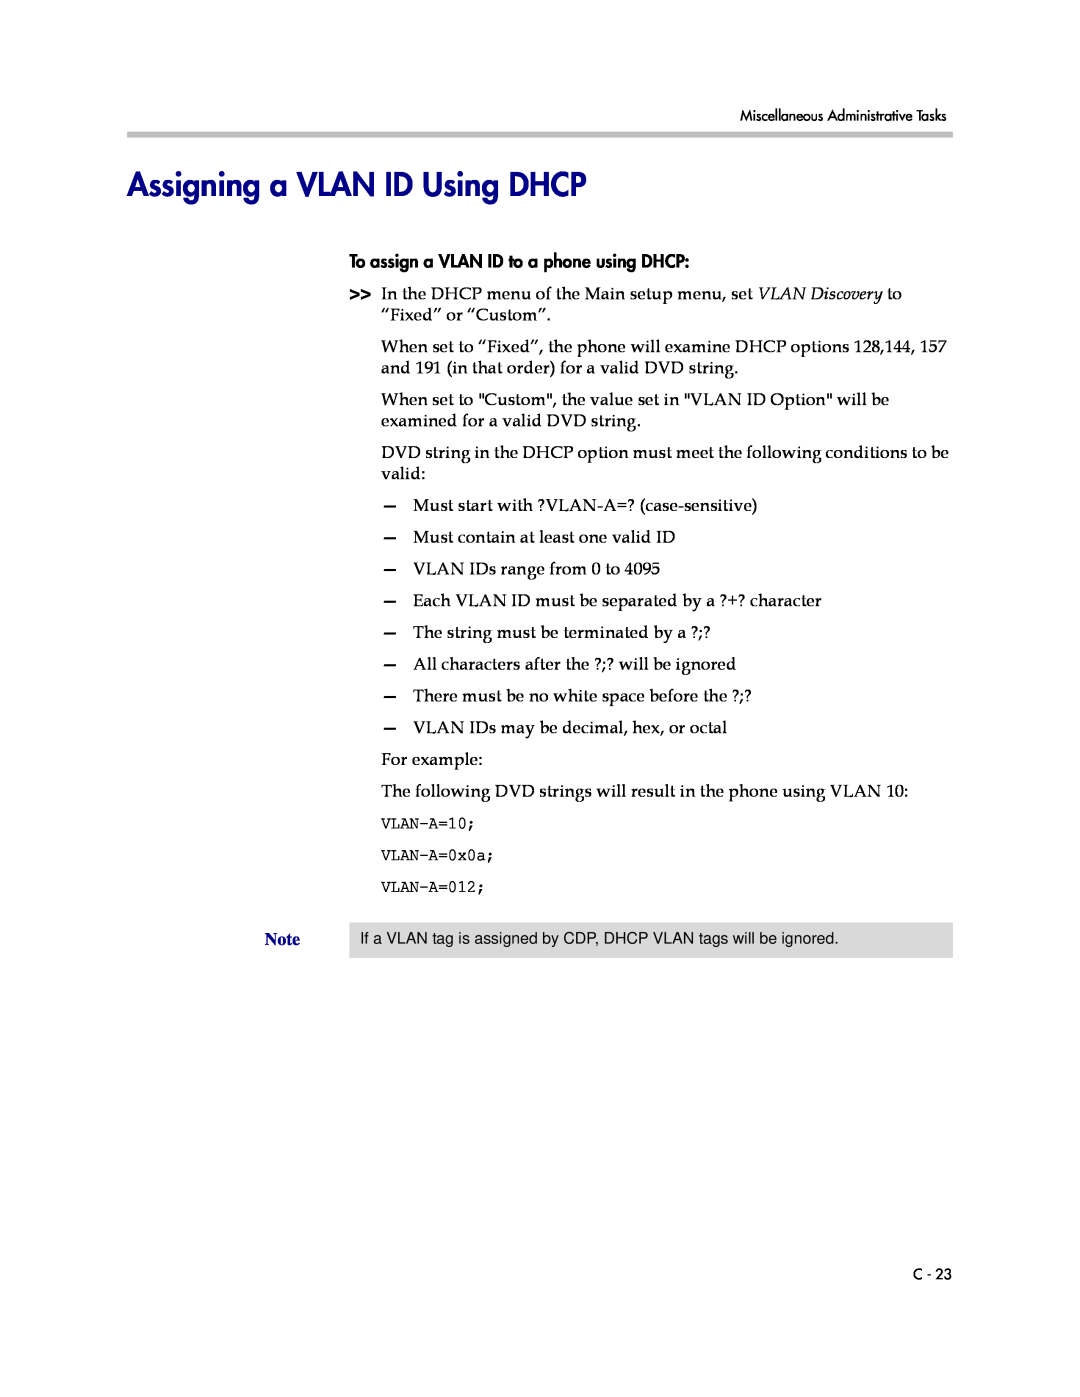 Polycom SIP 3.1 manual Assigning a VLAN ID Using DHCP 